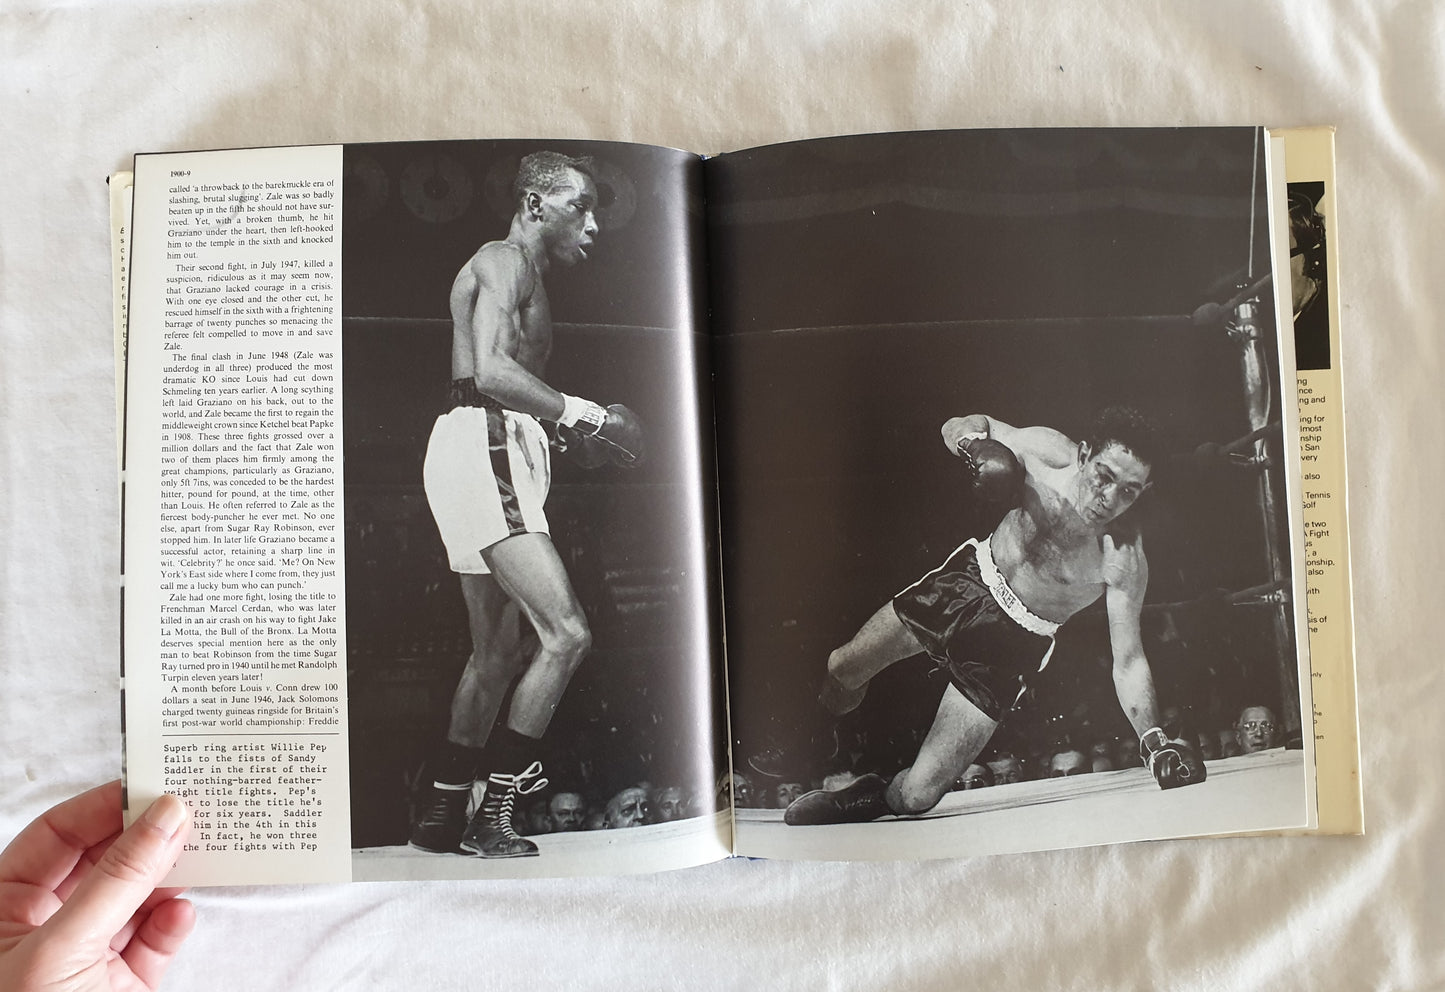 Boxing: A Pictorial History by Harry Carpenter